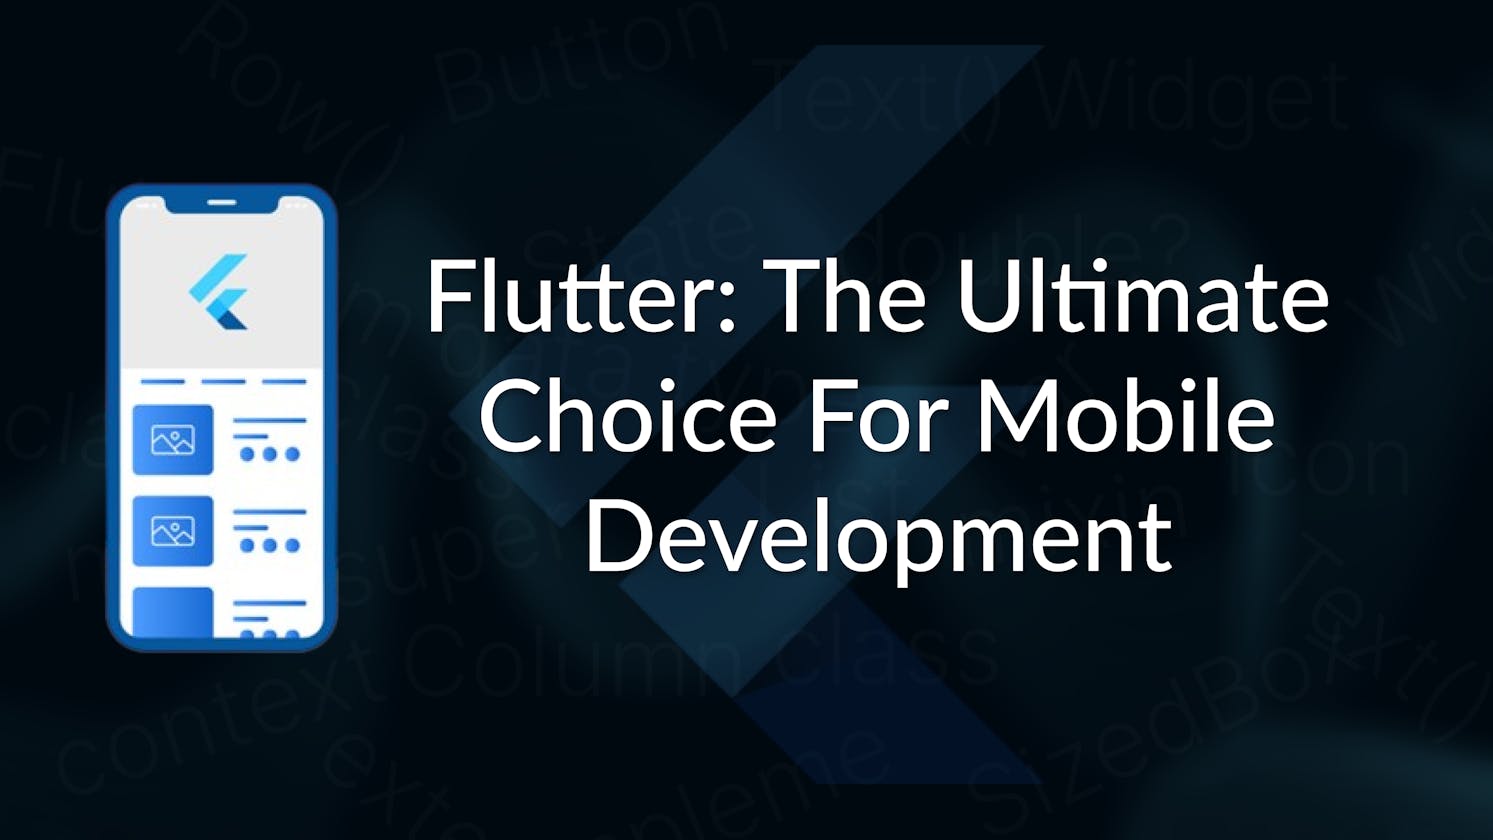 Flutter: The Ultimate Choice For Mobile Development